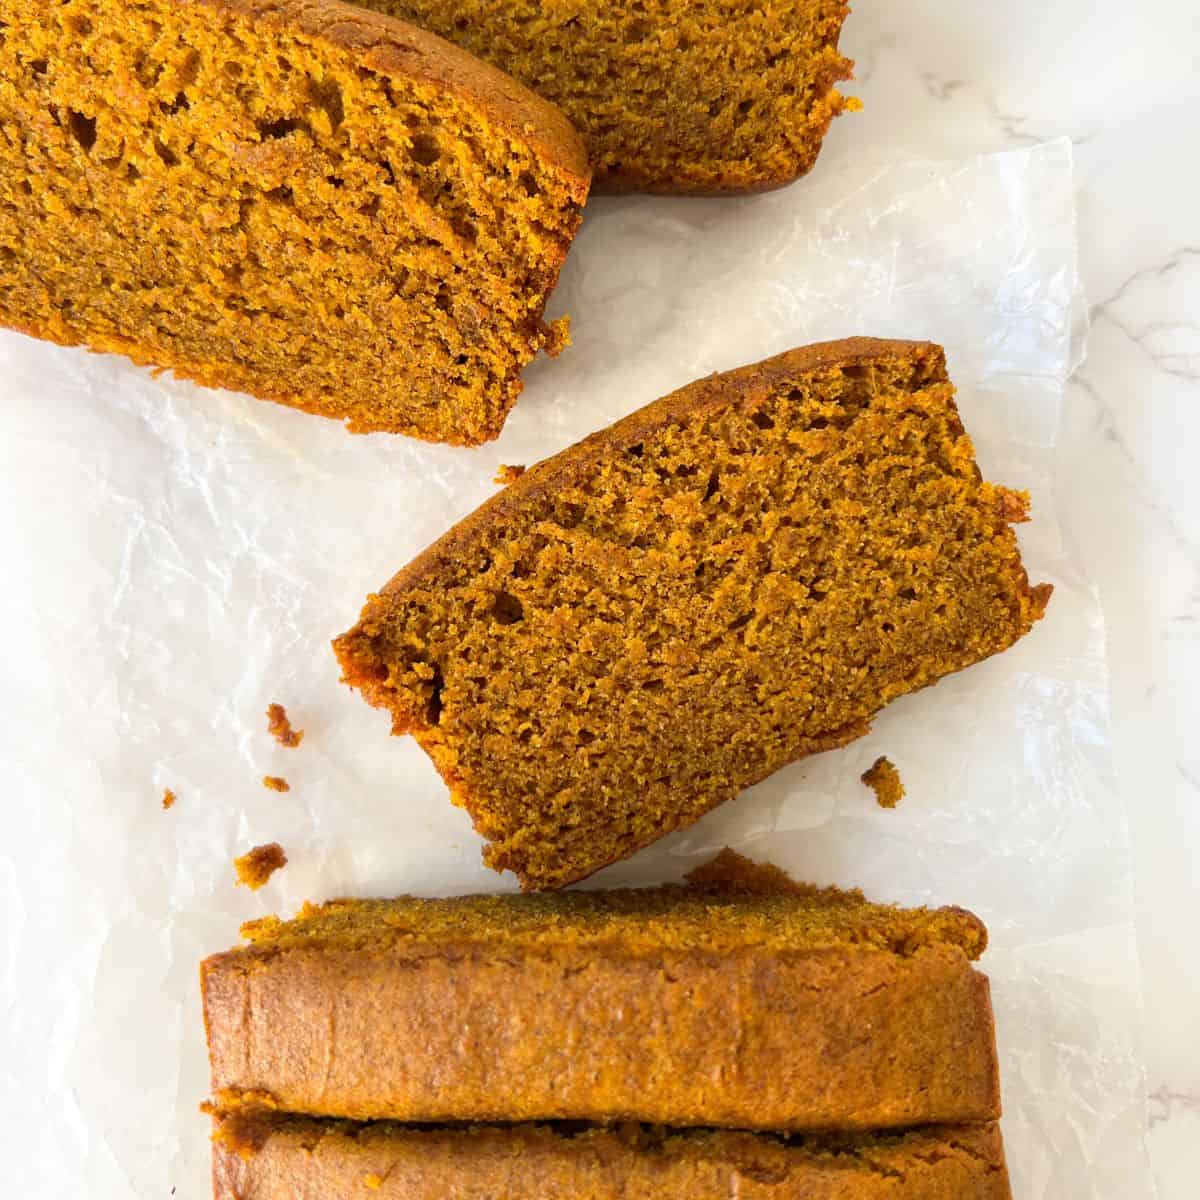 slices of buckwheat pumpkin bread flat on the table in front of the loaf